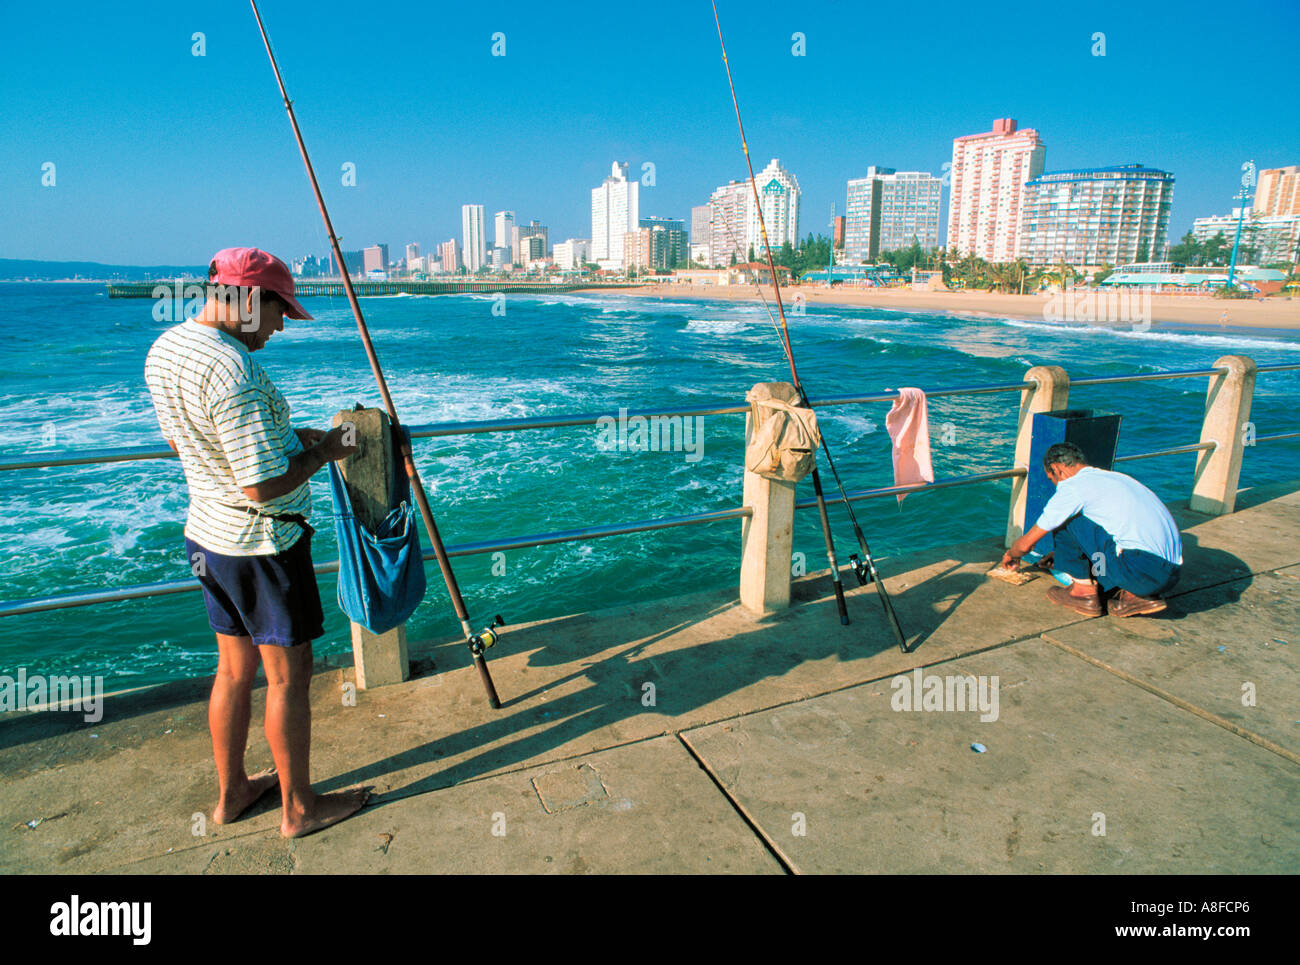 https://c8.alamy.com/comp/A8FCP6/fisherman-on-pier-with-fishing-rod-durban-south-africa-A8FCP6.jpg